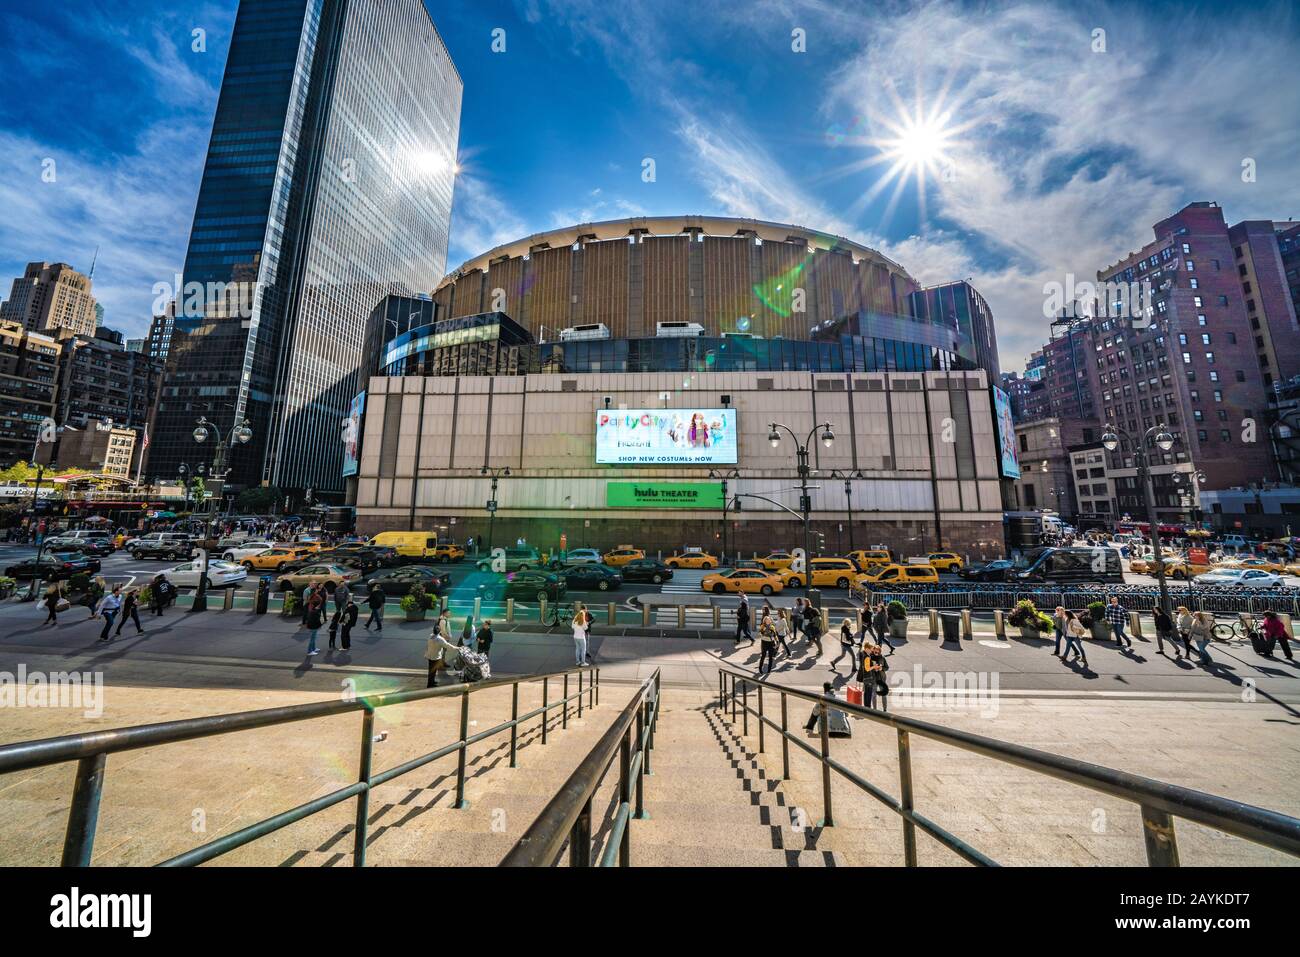 NEW YORK, USA - OCTOBER 13: This is a view of Madison Square Garden outside Penn Station on 8th Avenue on October 13, 2019 in New York Stock Photo